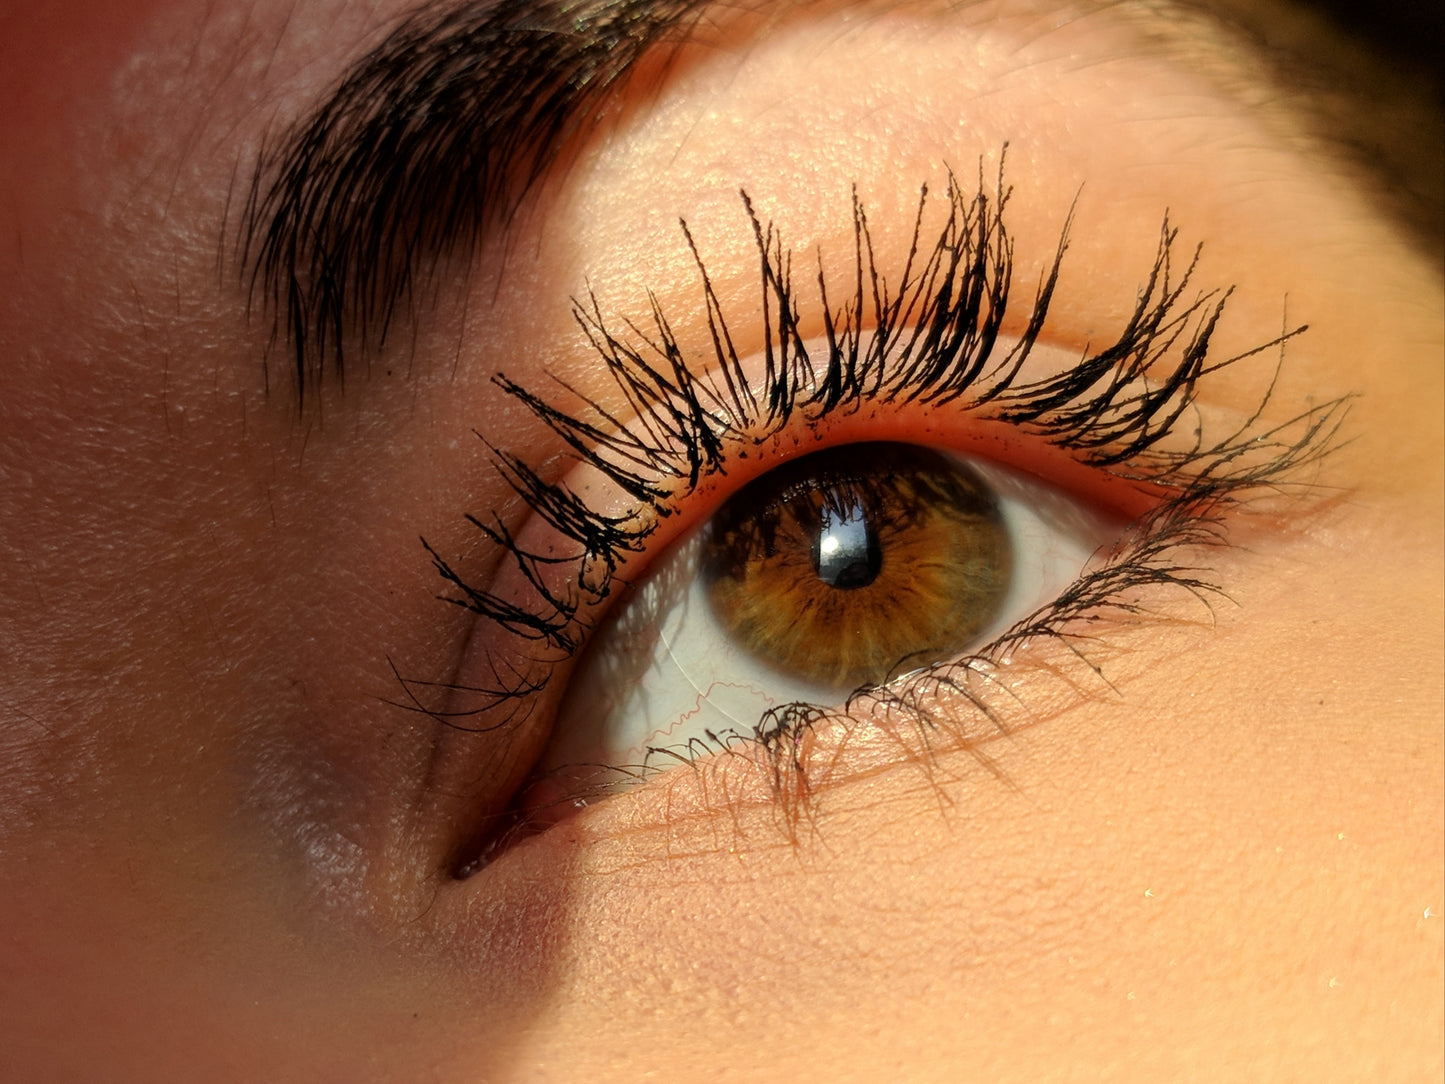 Lash Growth Serum Exposed: A Case Study